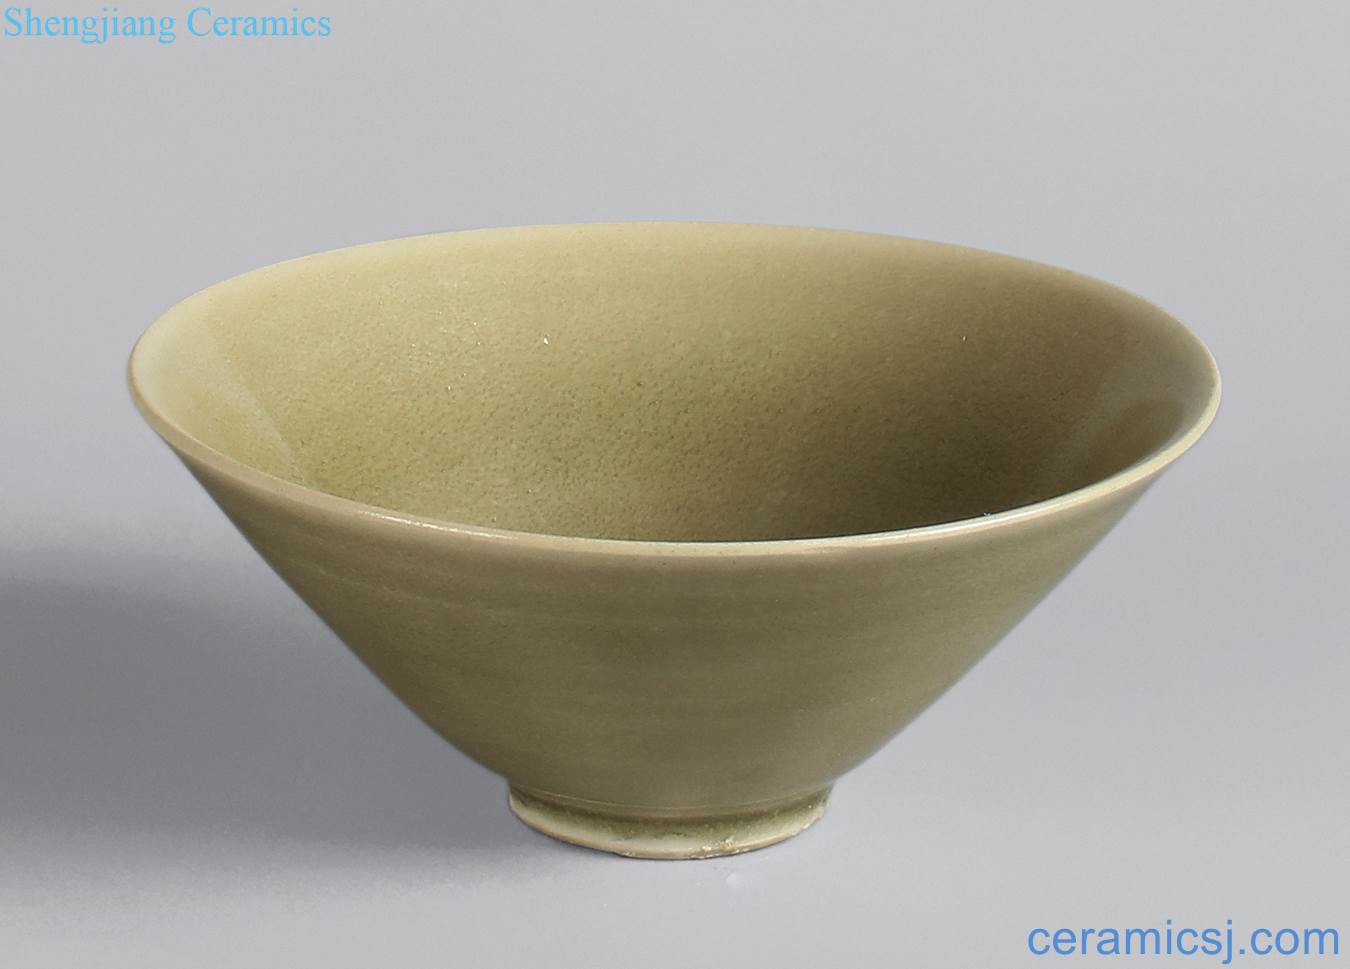 Northern song dynasty (960-1127) and gold (1115-1234), yao state kiln green glaze small bowl